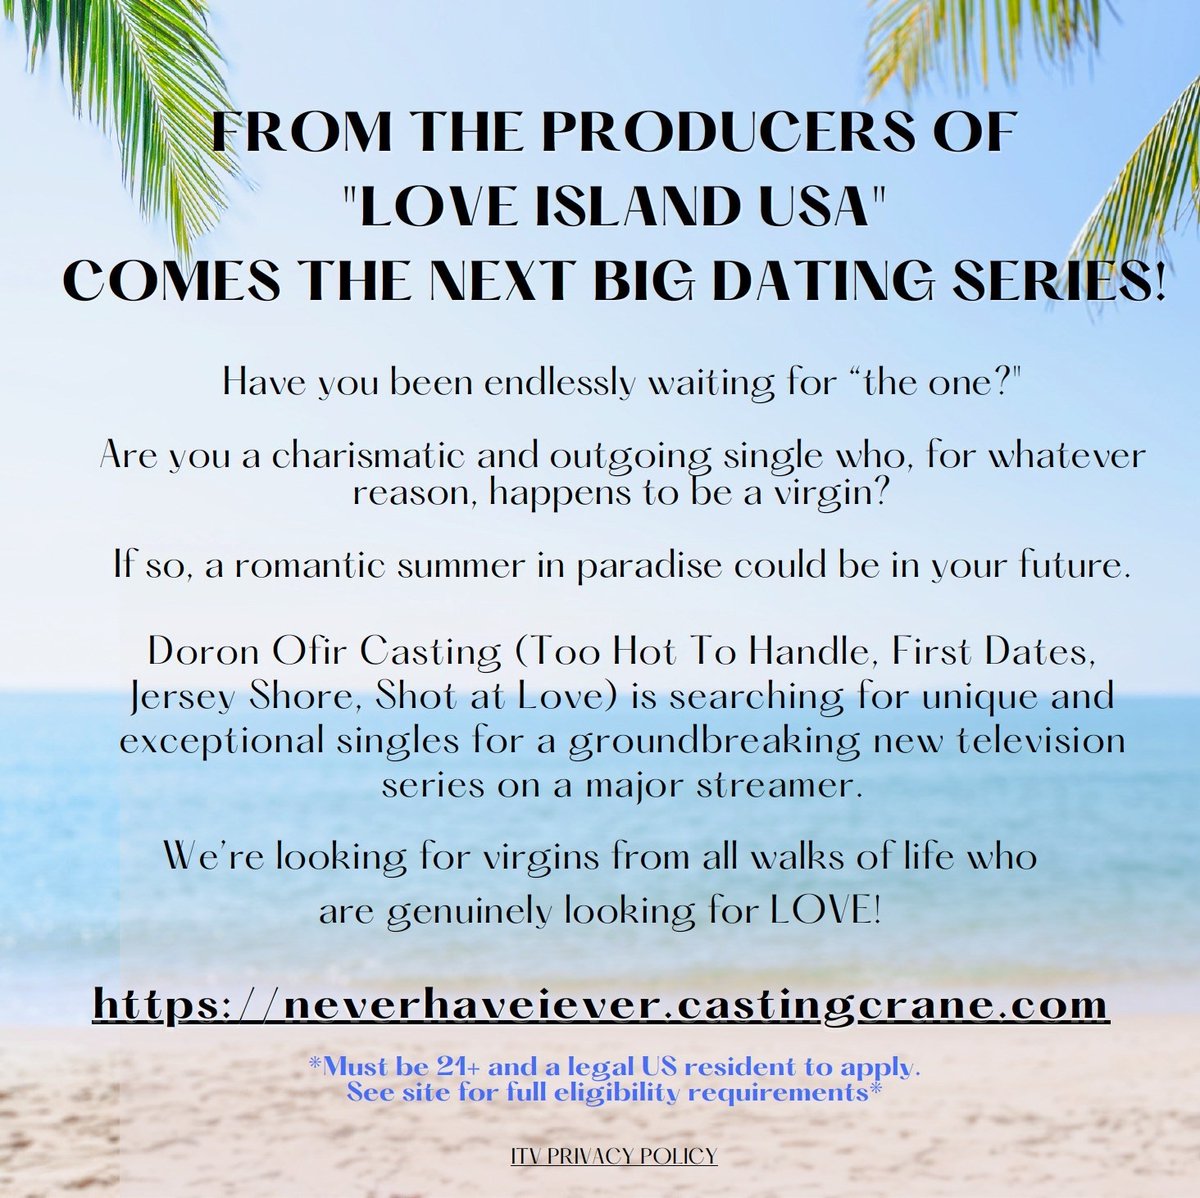 CASTING ALERT! Do you want to be on the next big dating show? From the producers of Love Island USA comes 'Never Have I Ever' - the Untitled Virgin Project. Don’t miss your chance for love! Learn more and apply now at AuditionList.io!  #NeverHaveIEver #CastingCall